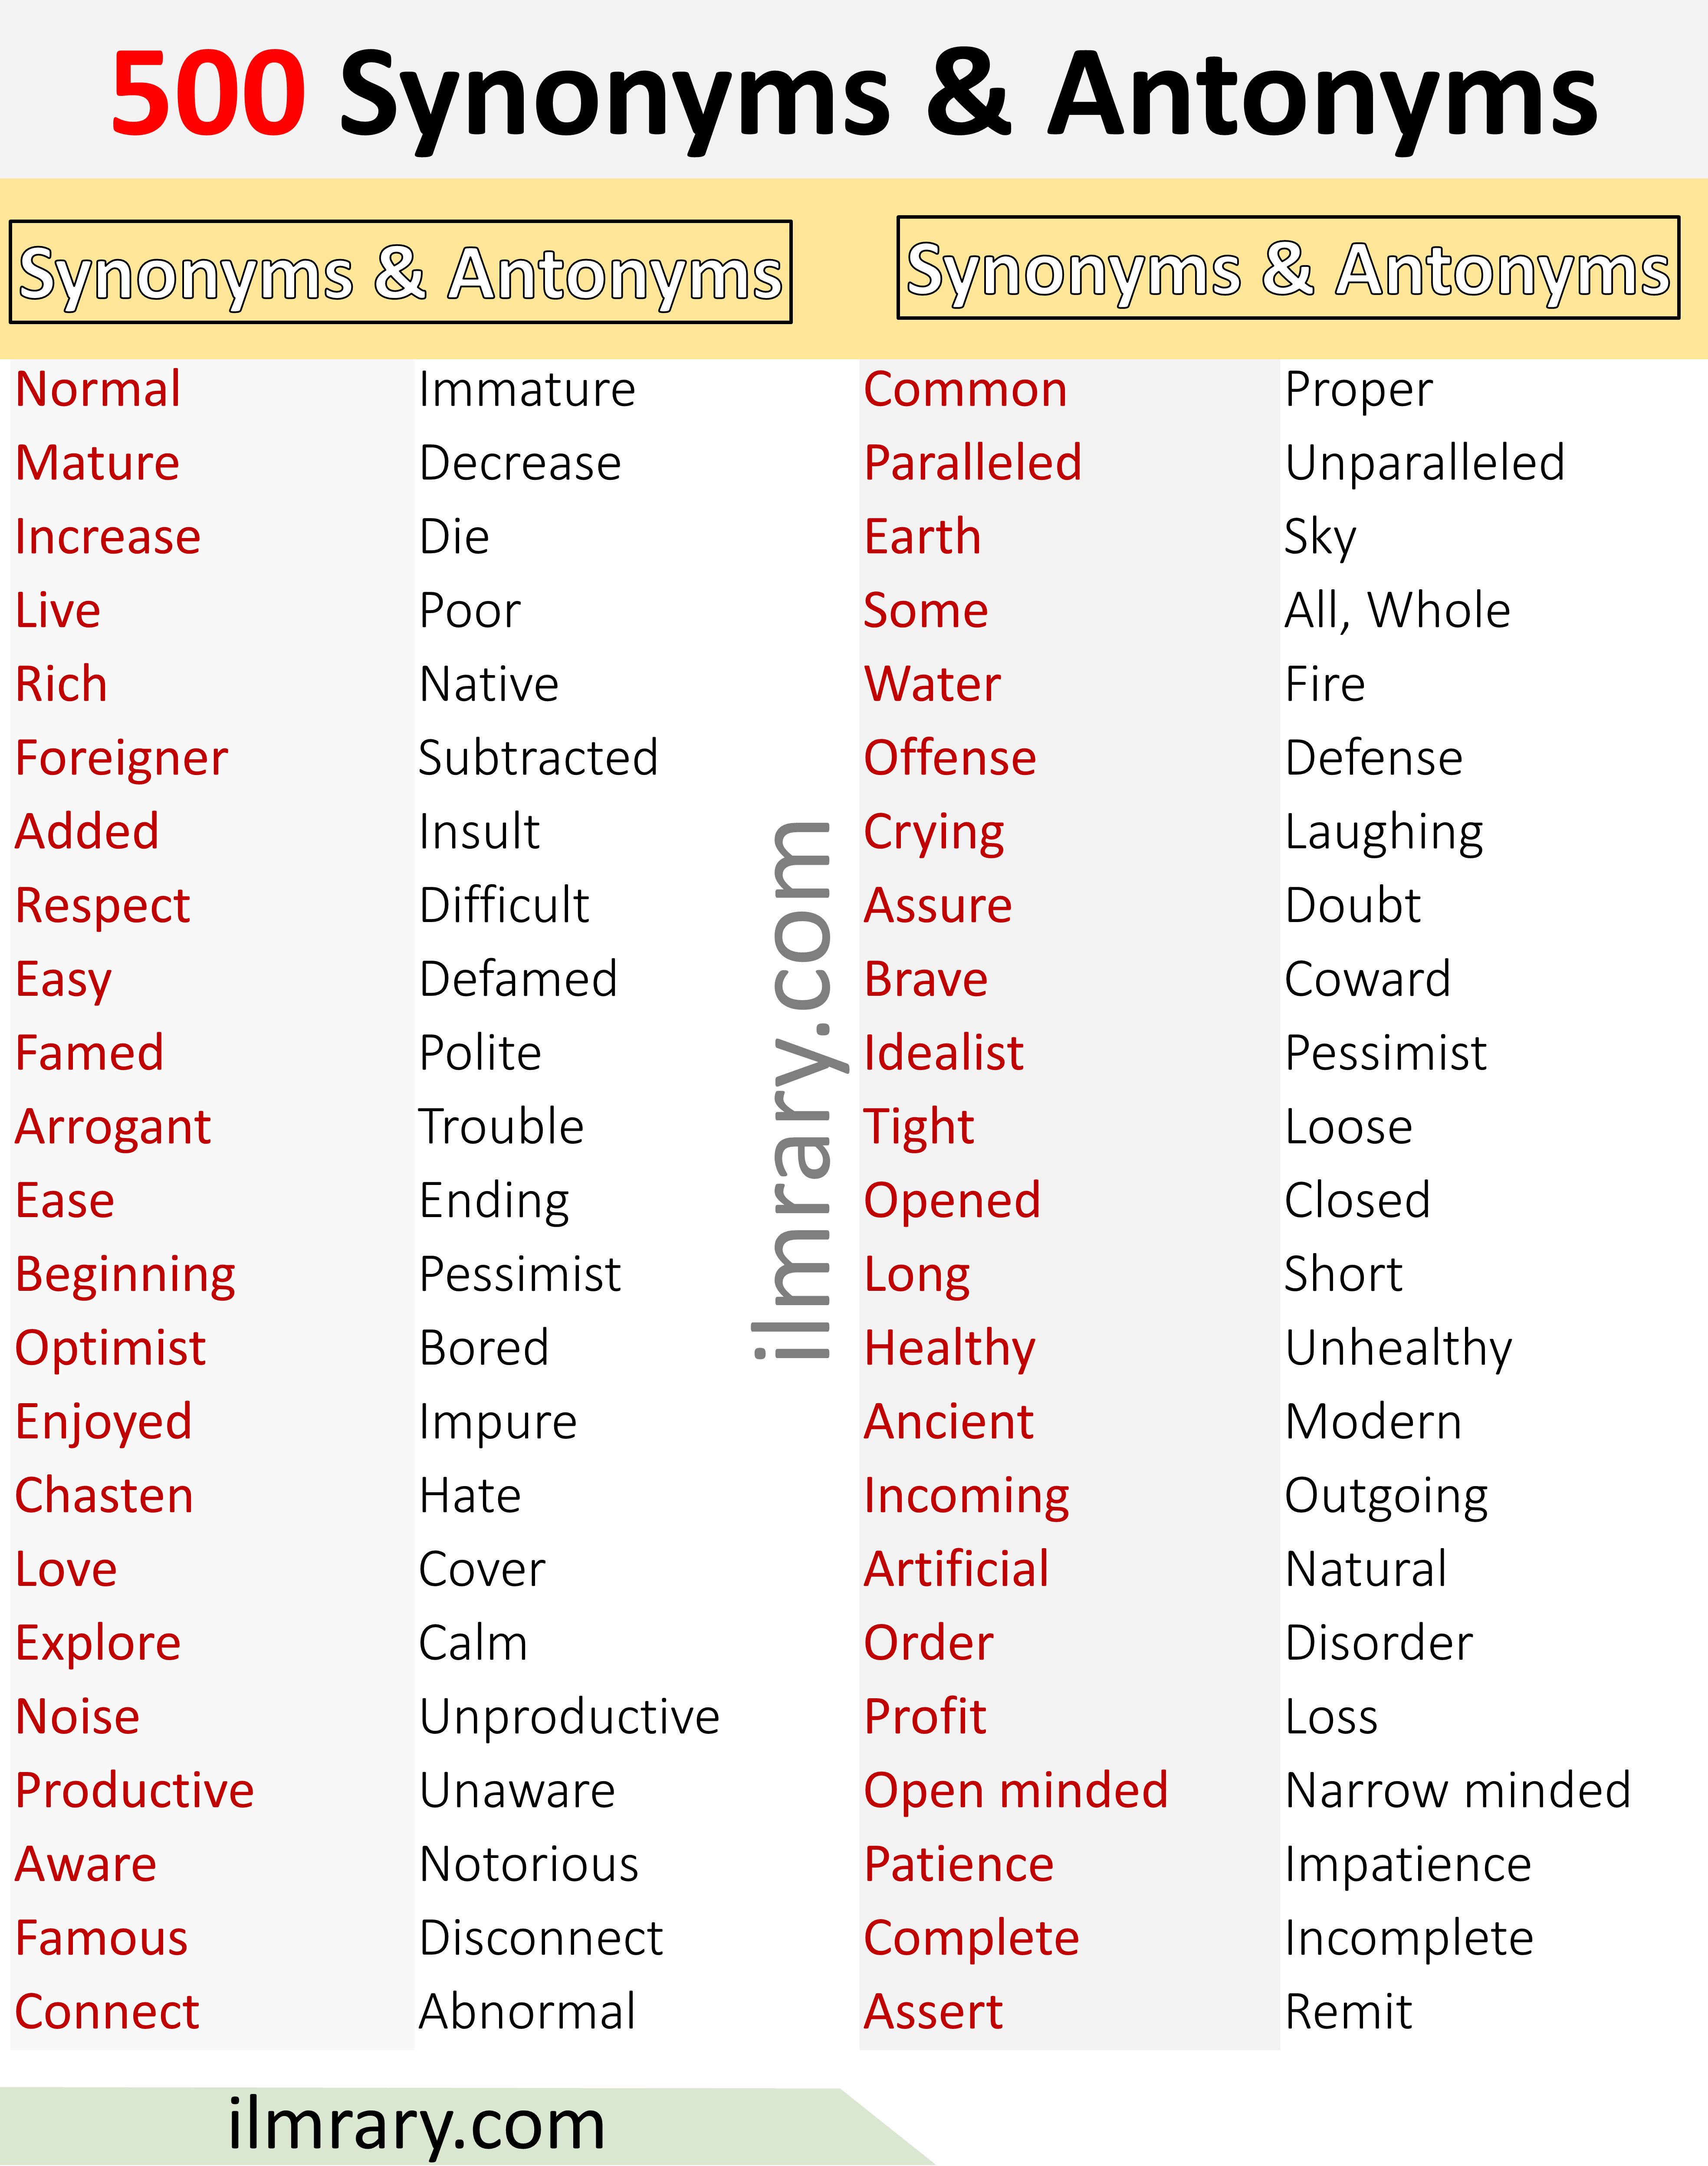 500 list of Common Synonyms and Antonyms in English- A to Z Synonyms & Antonyms